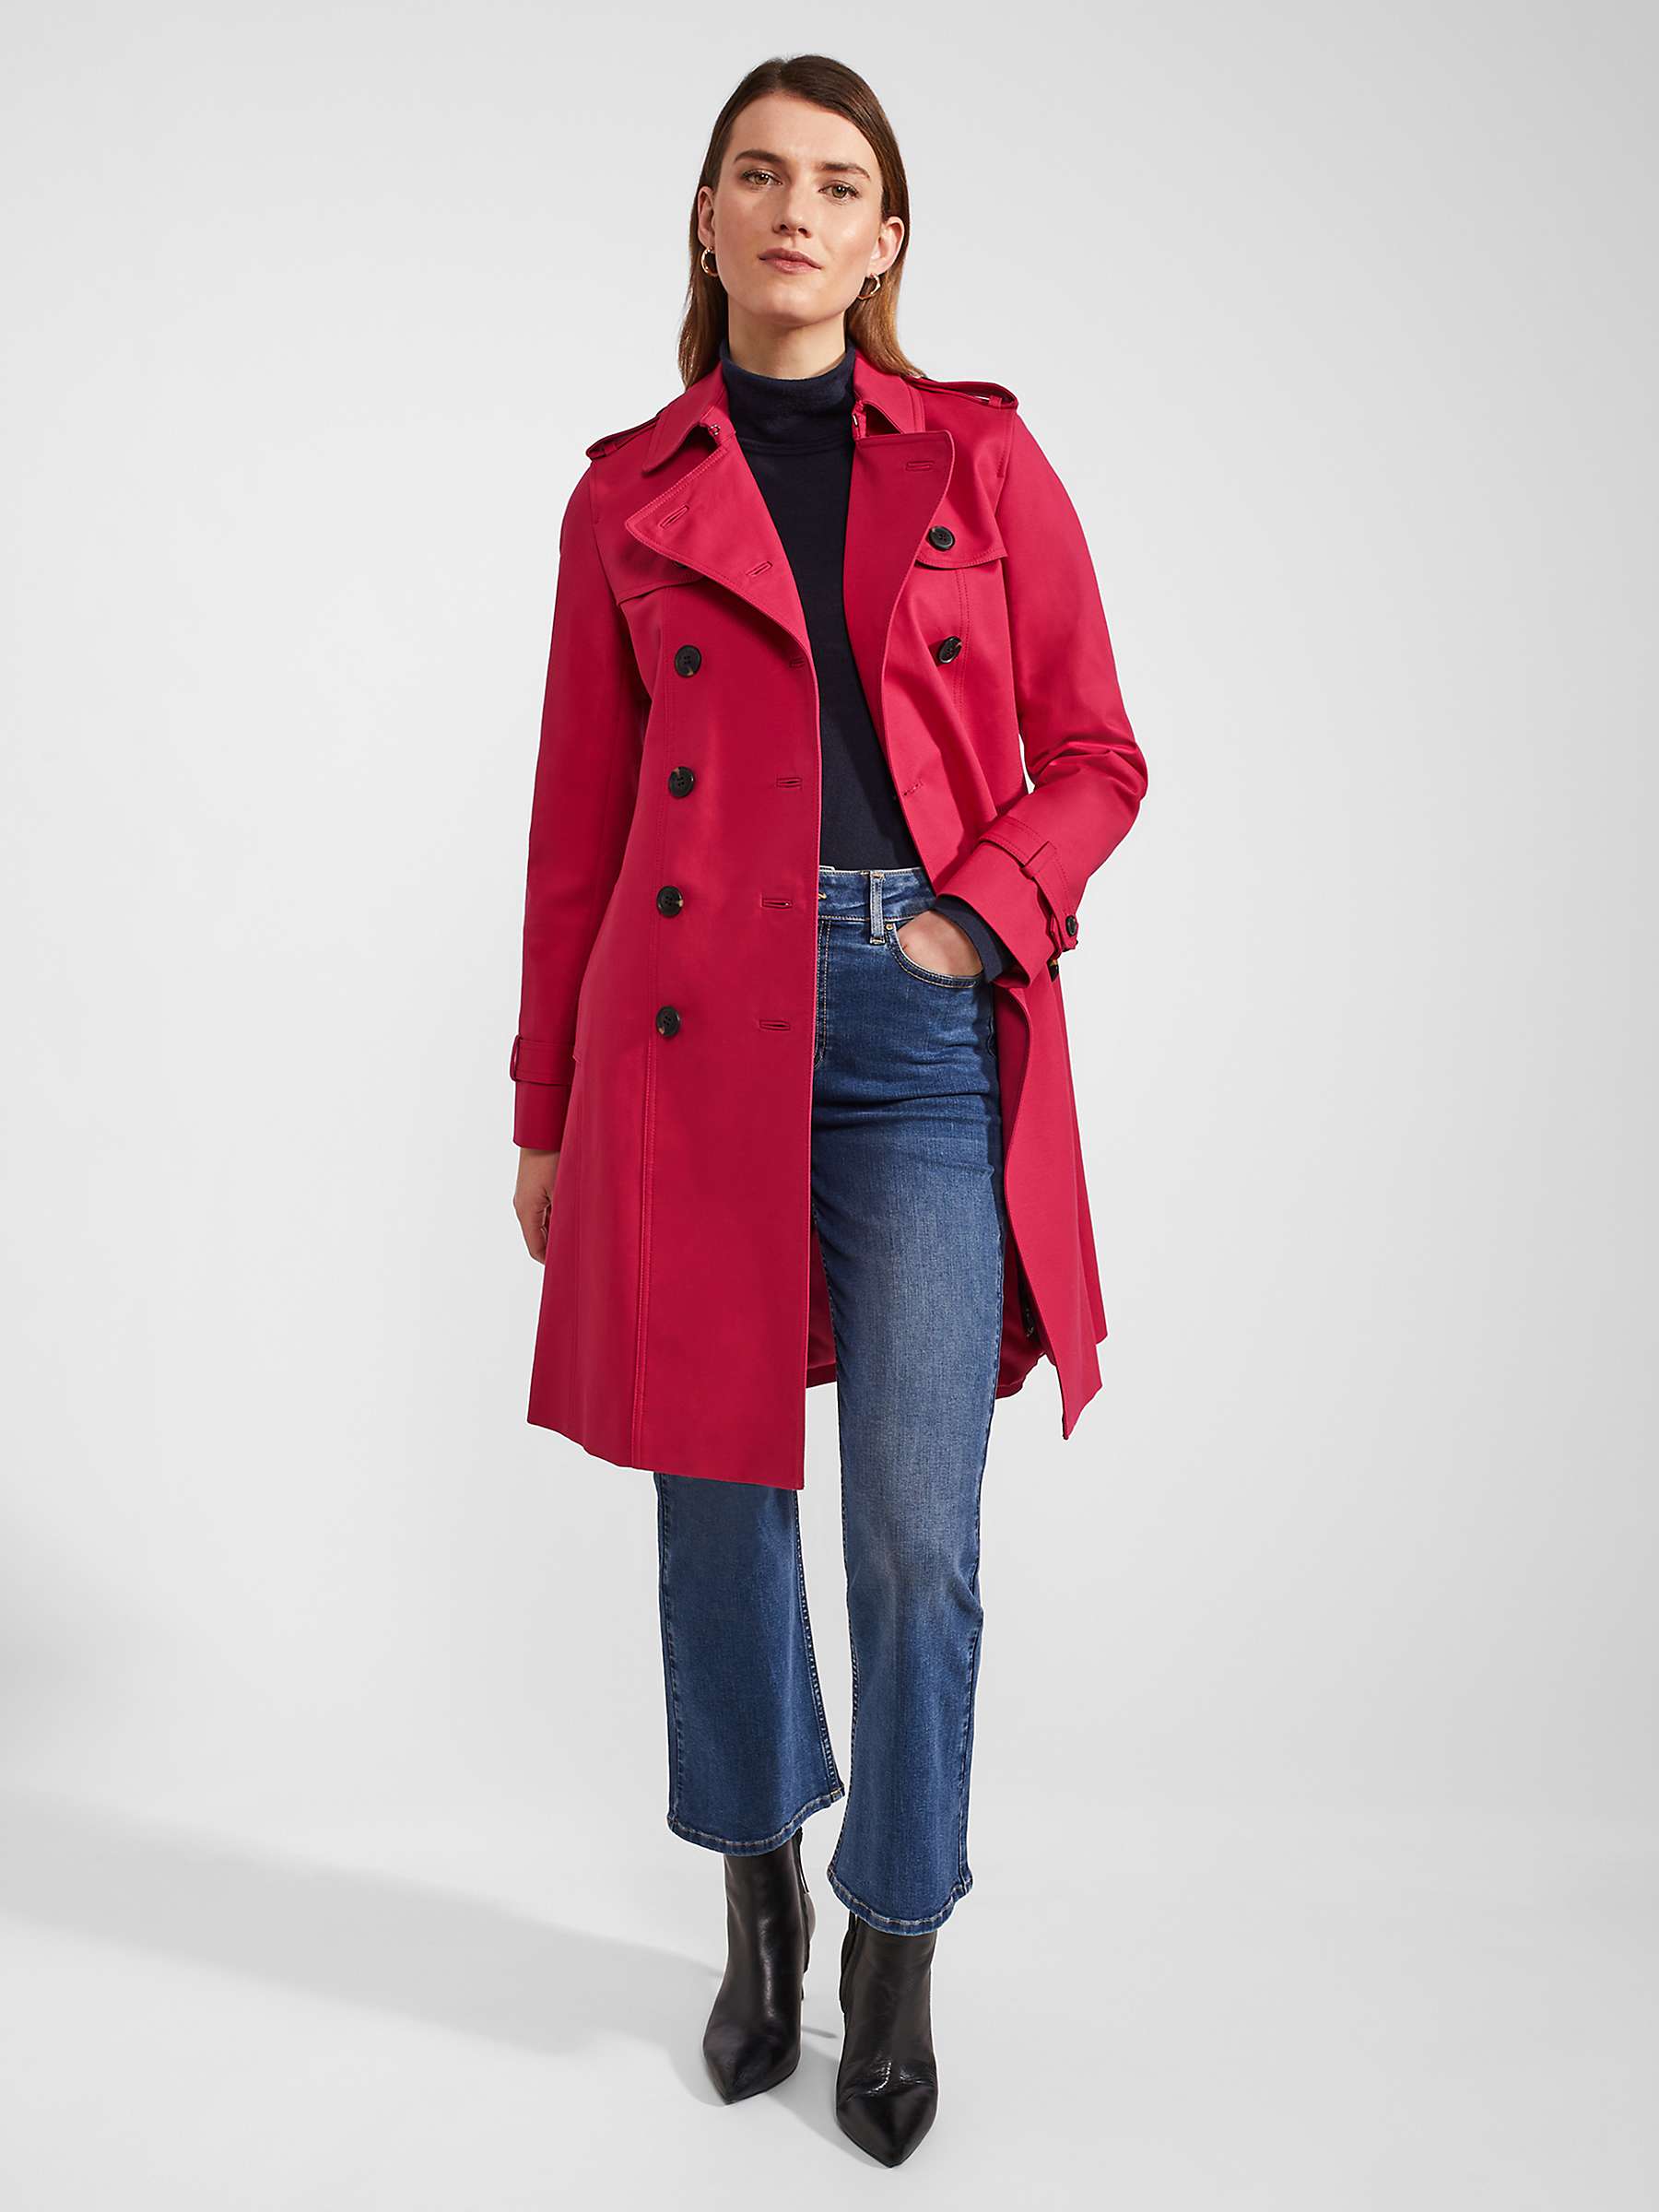 Buy Hobbs Saskia Double Breasted Trench Coat Online at johnlewis.com